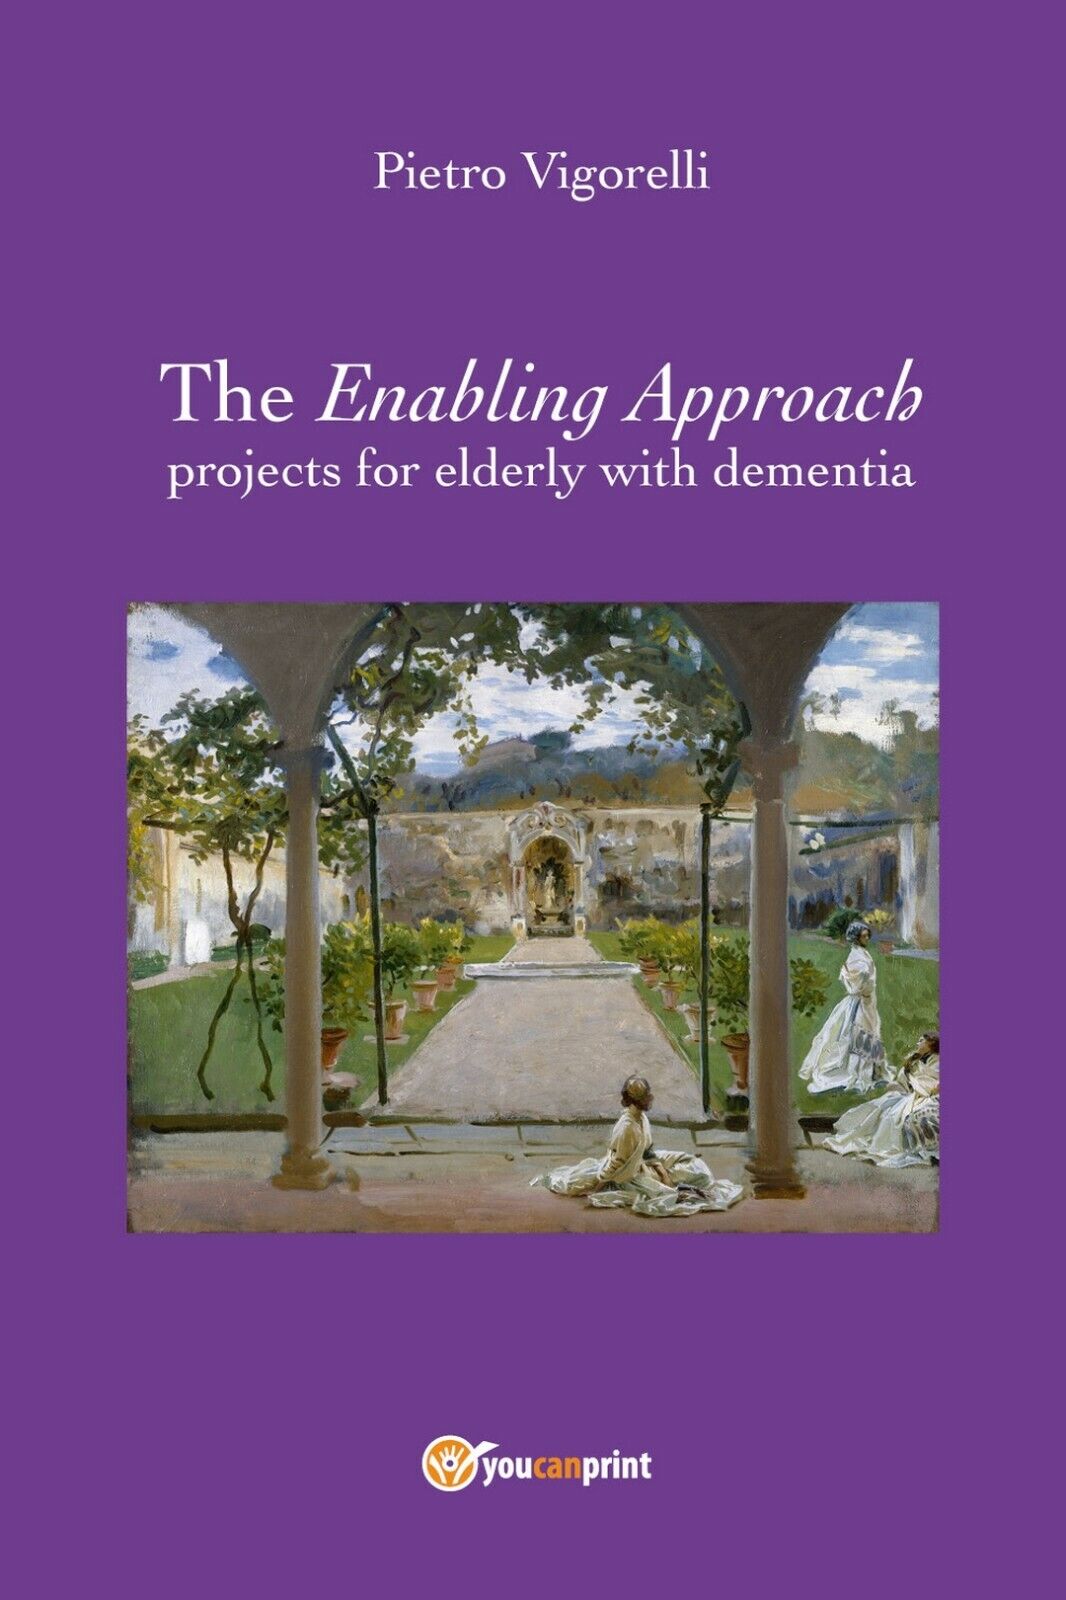 The Enabling Approach projects for elderly with dementia  di Pietro Vigorelli,  